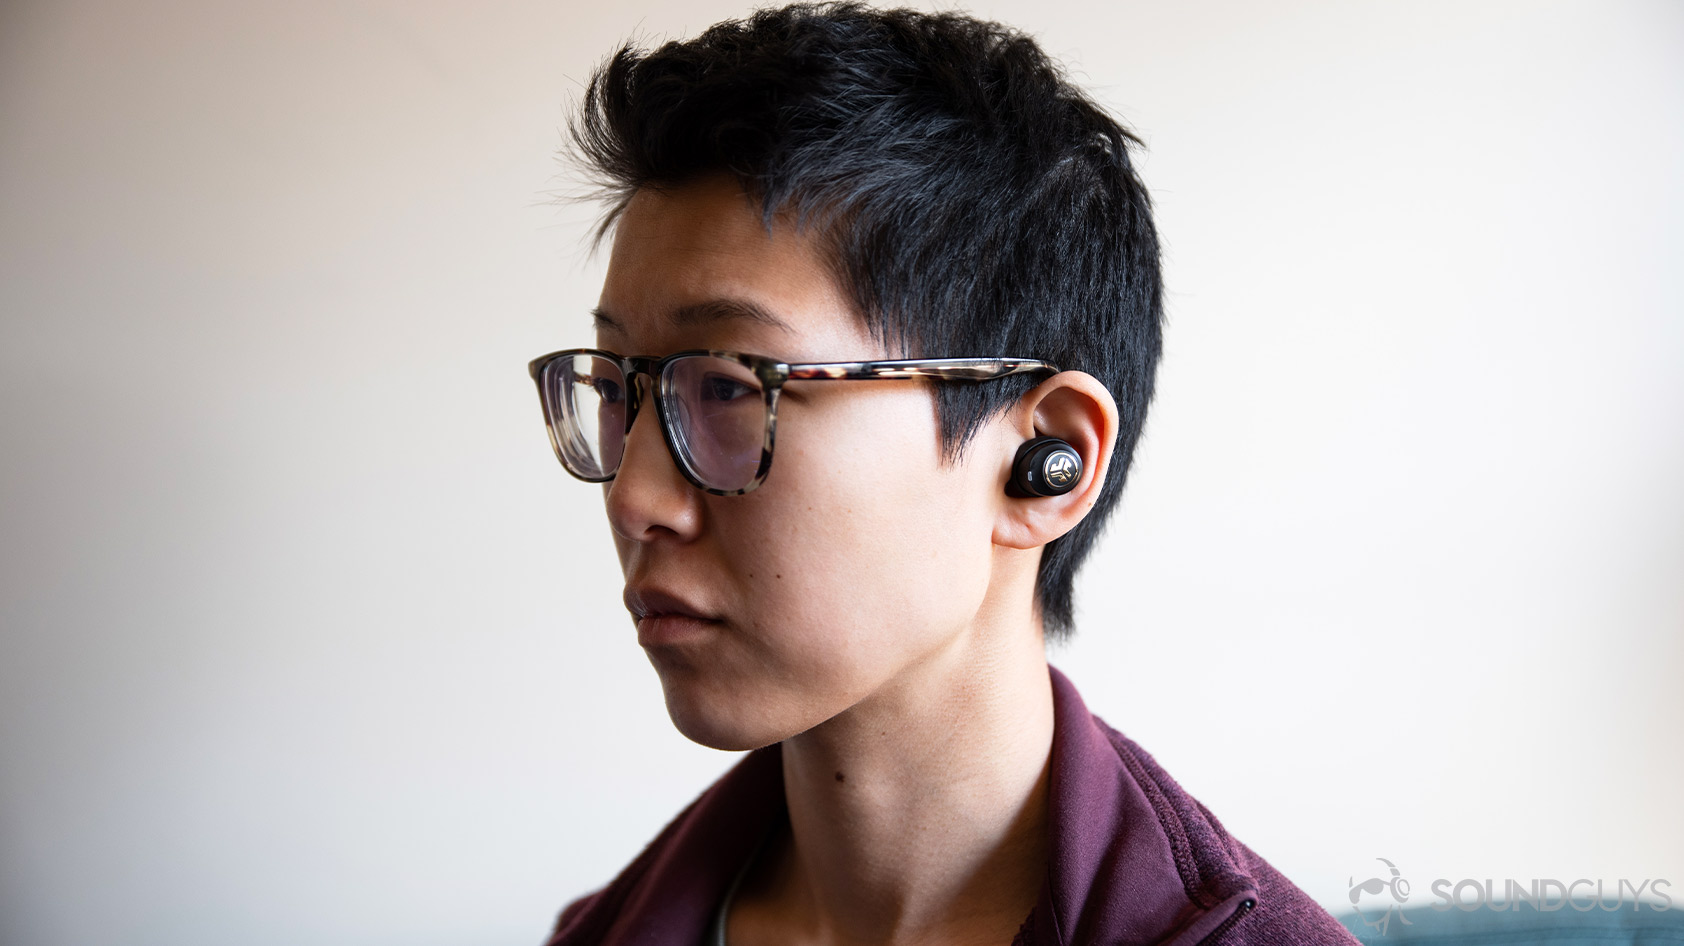 A picture of the JLab JBuds Air Icon true wireless earbuds worn by a woman looking to the left of the frame.